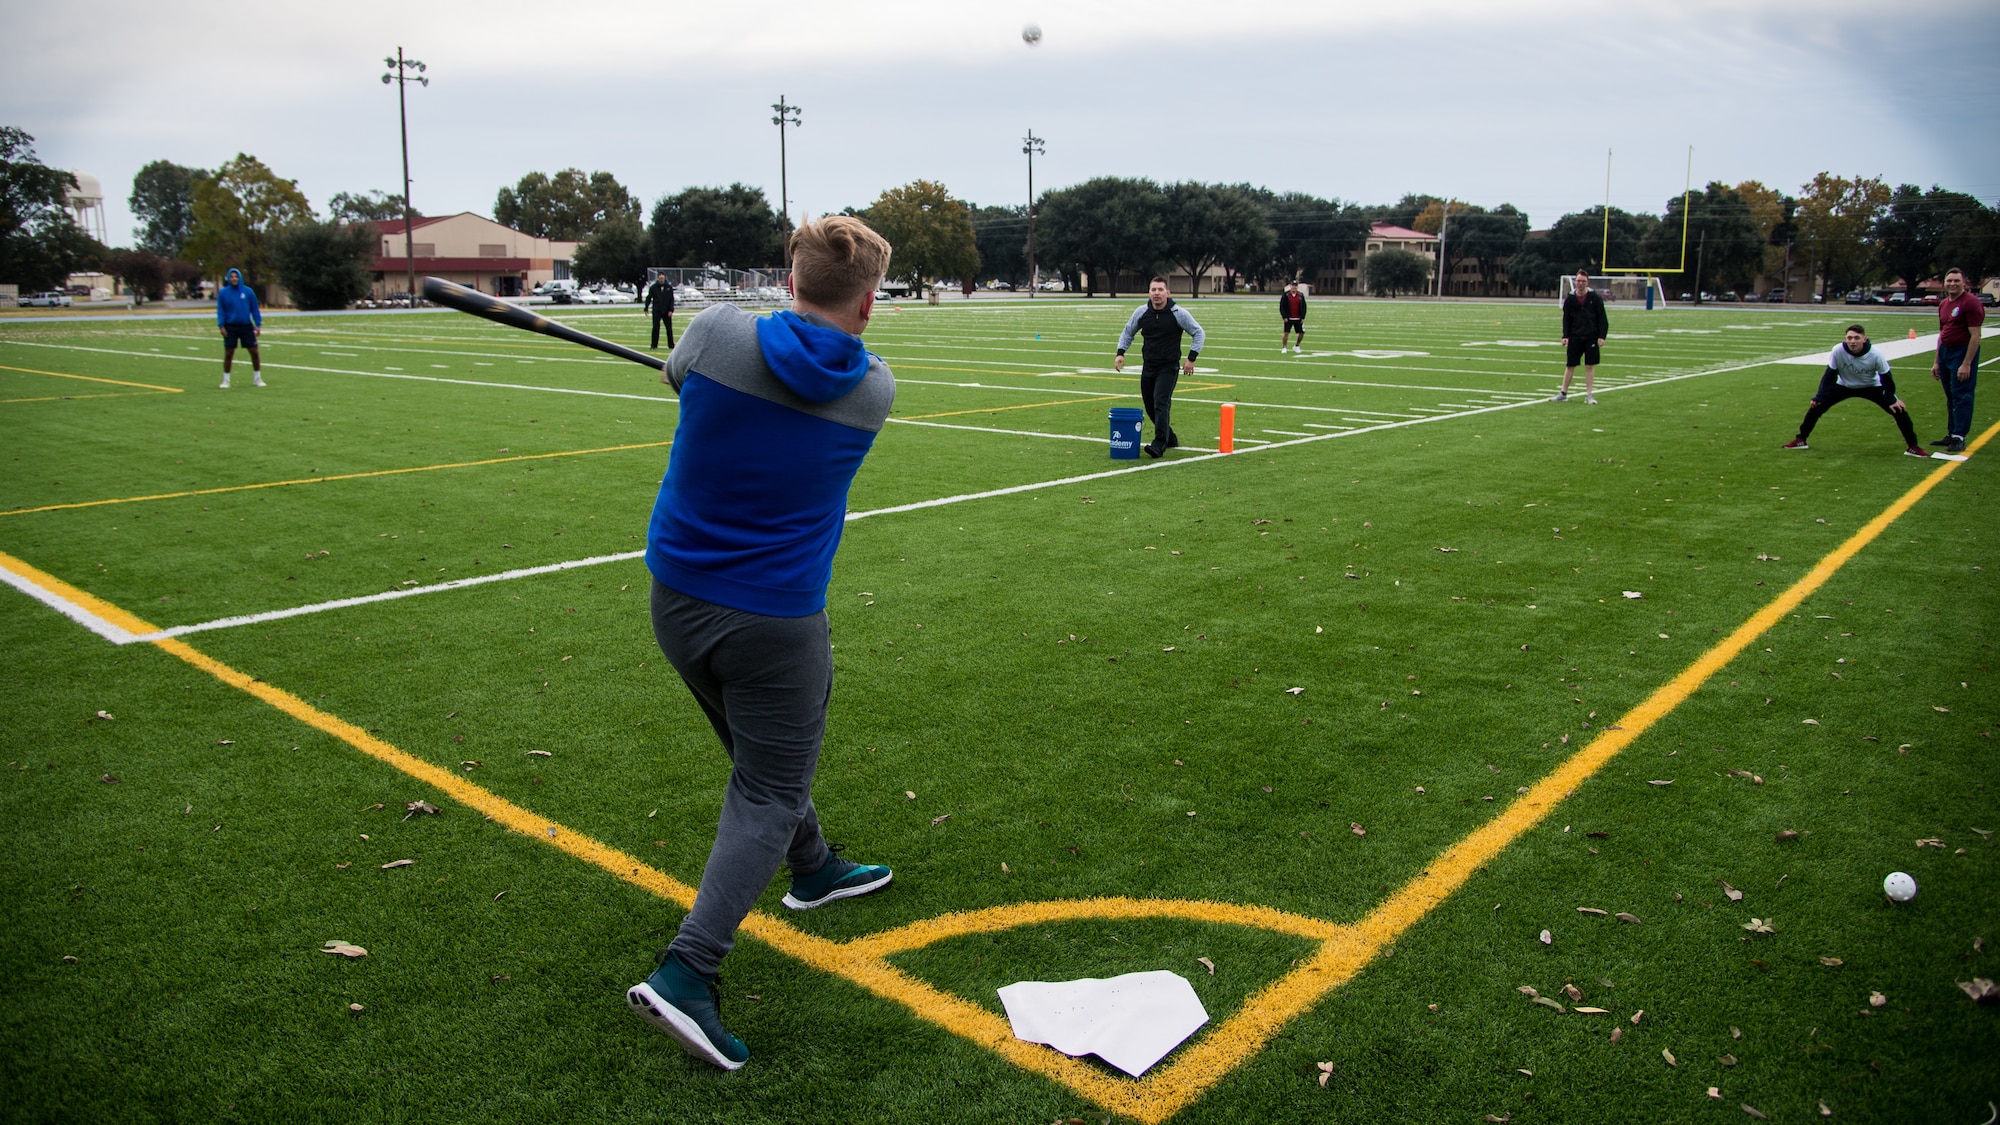 Airmen from the 608th Air Operations Center play a game of wiffle ball during their unit's resiliency sports day at Barksdale Air Force Base, La., Nov. 8, 2019.